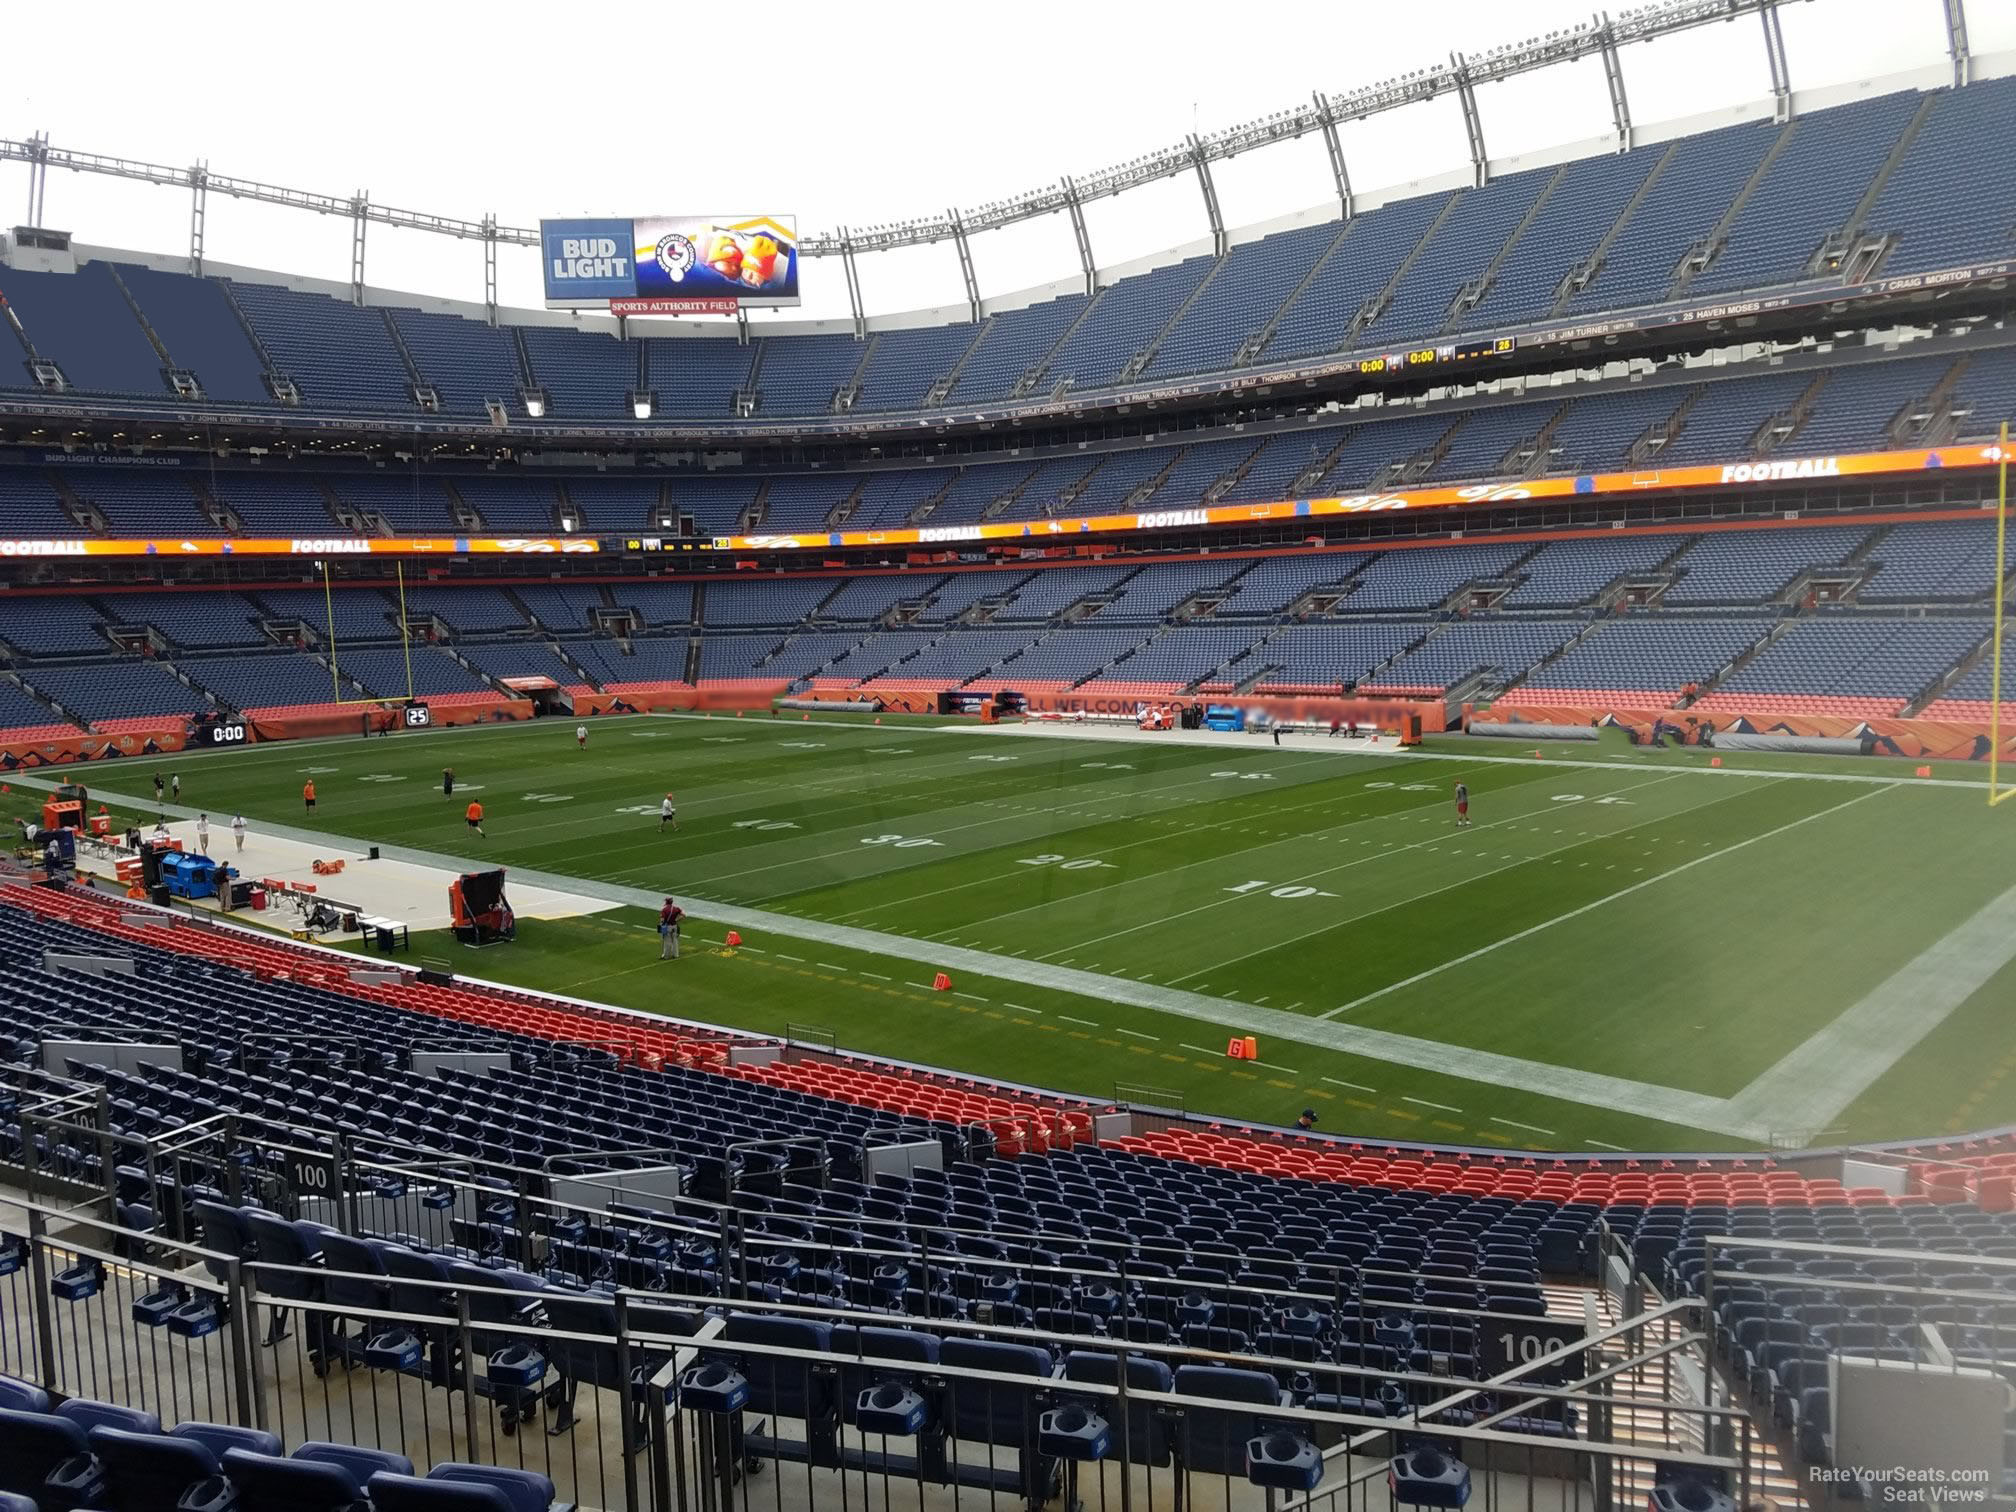 section 100, row 30 seat view  - empower field (at mile high)